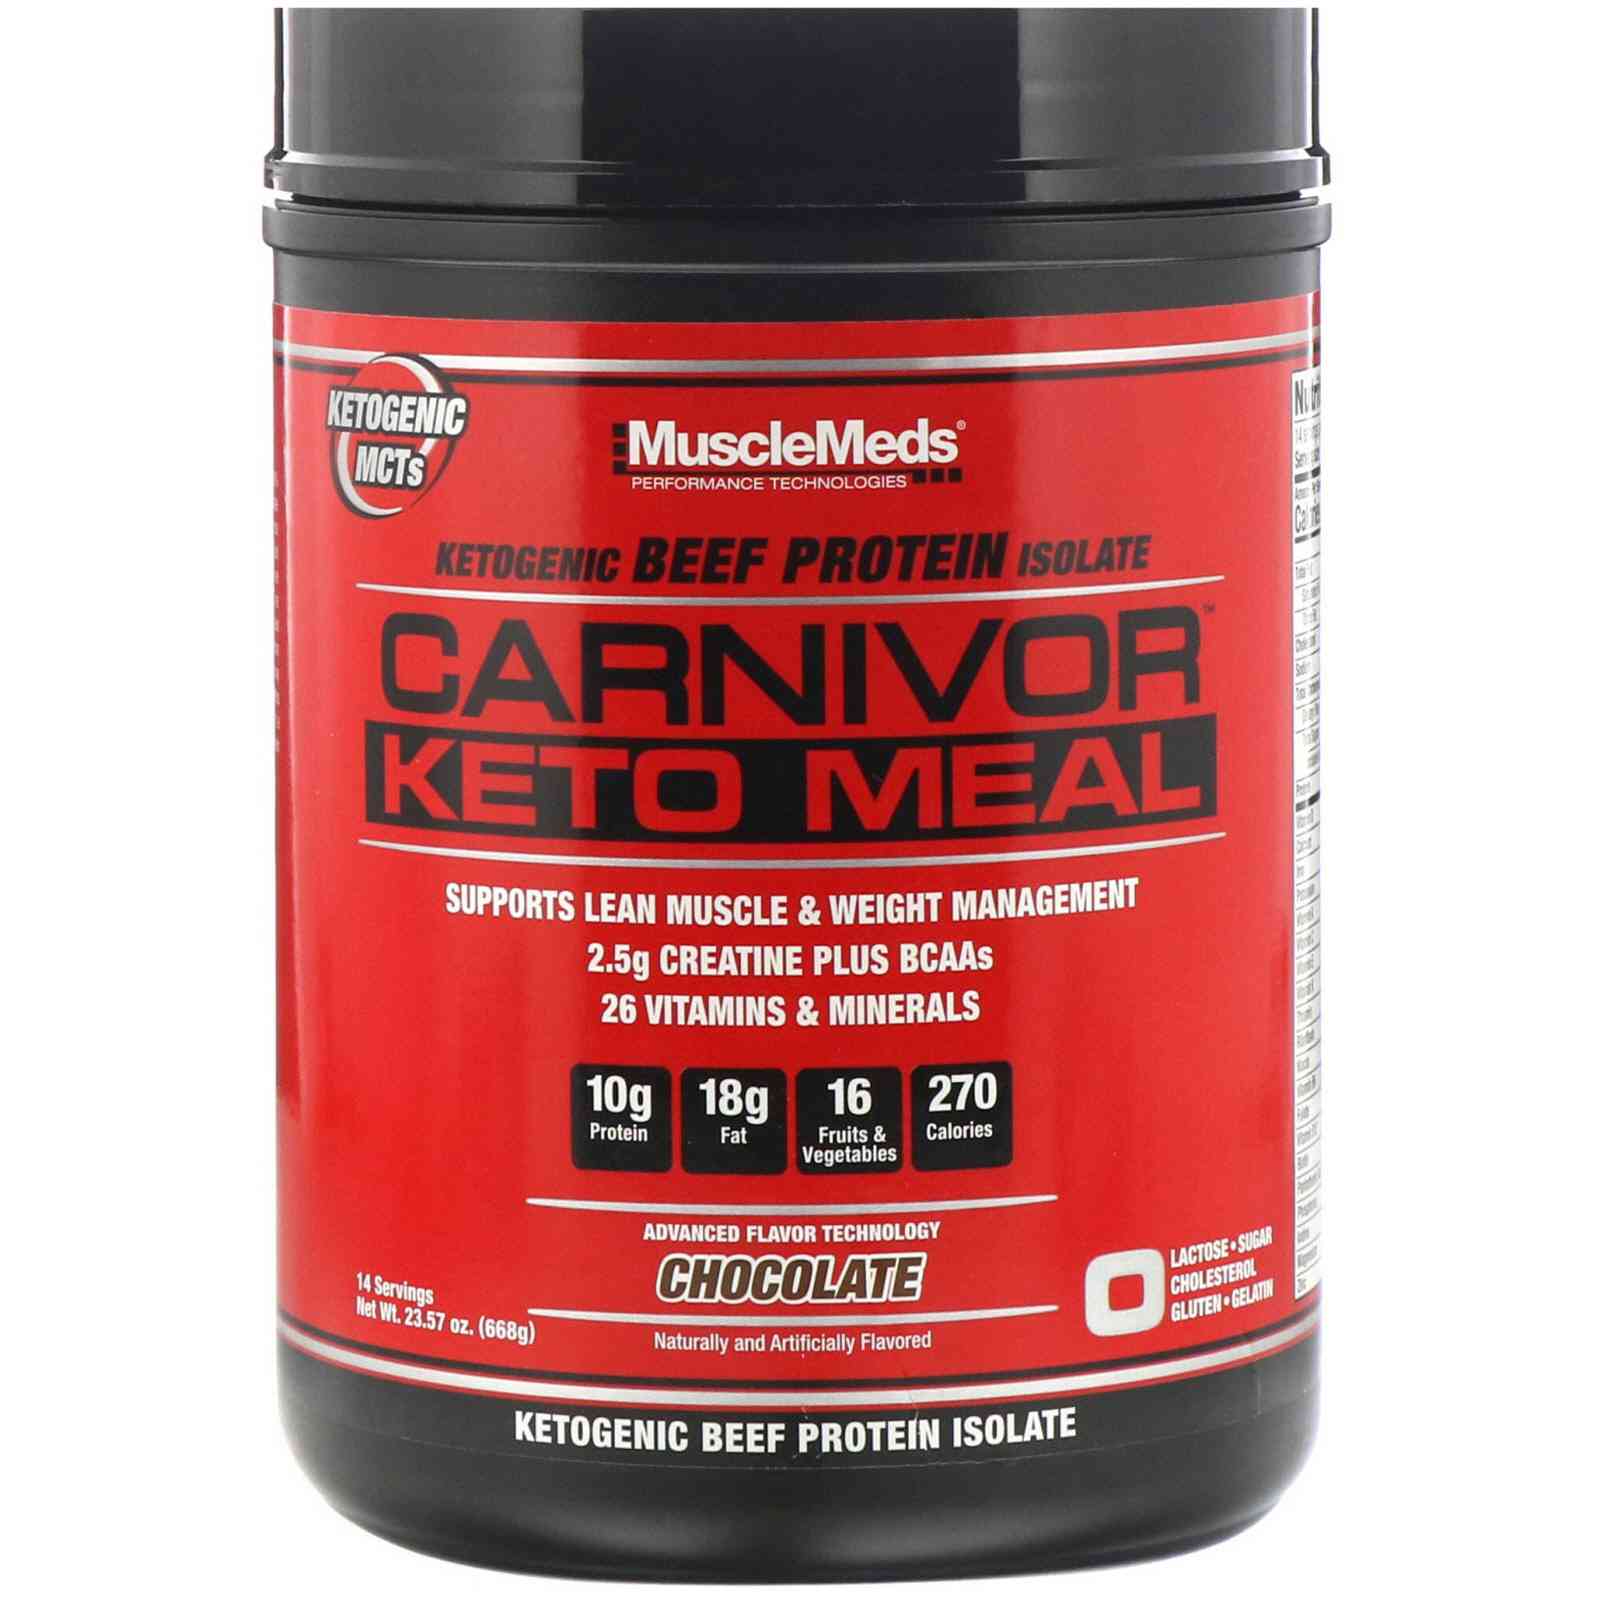 Carnivor by musclemeds: lowest prices at muscle & strength